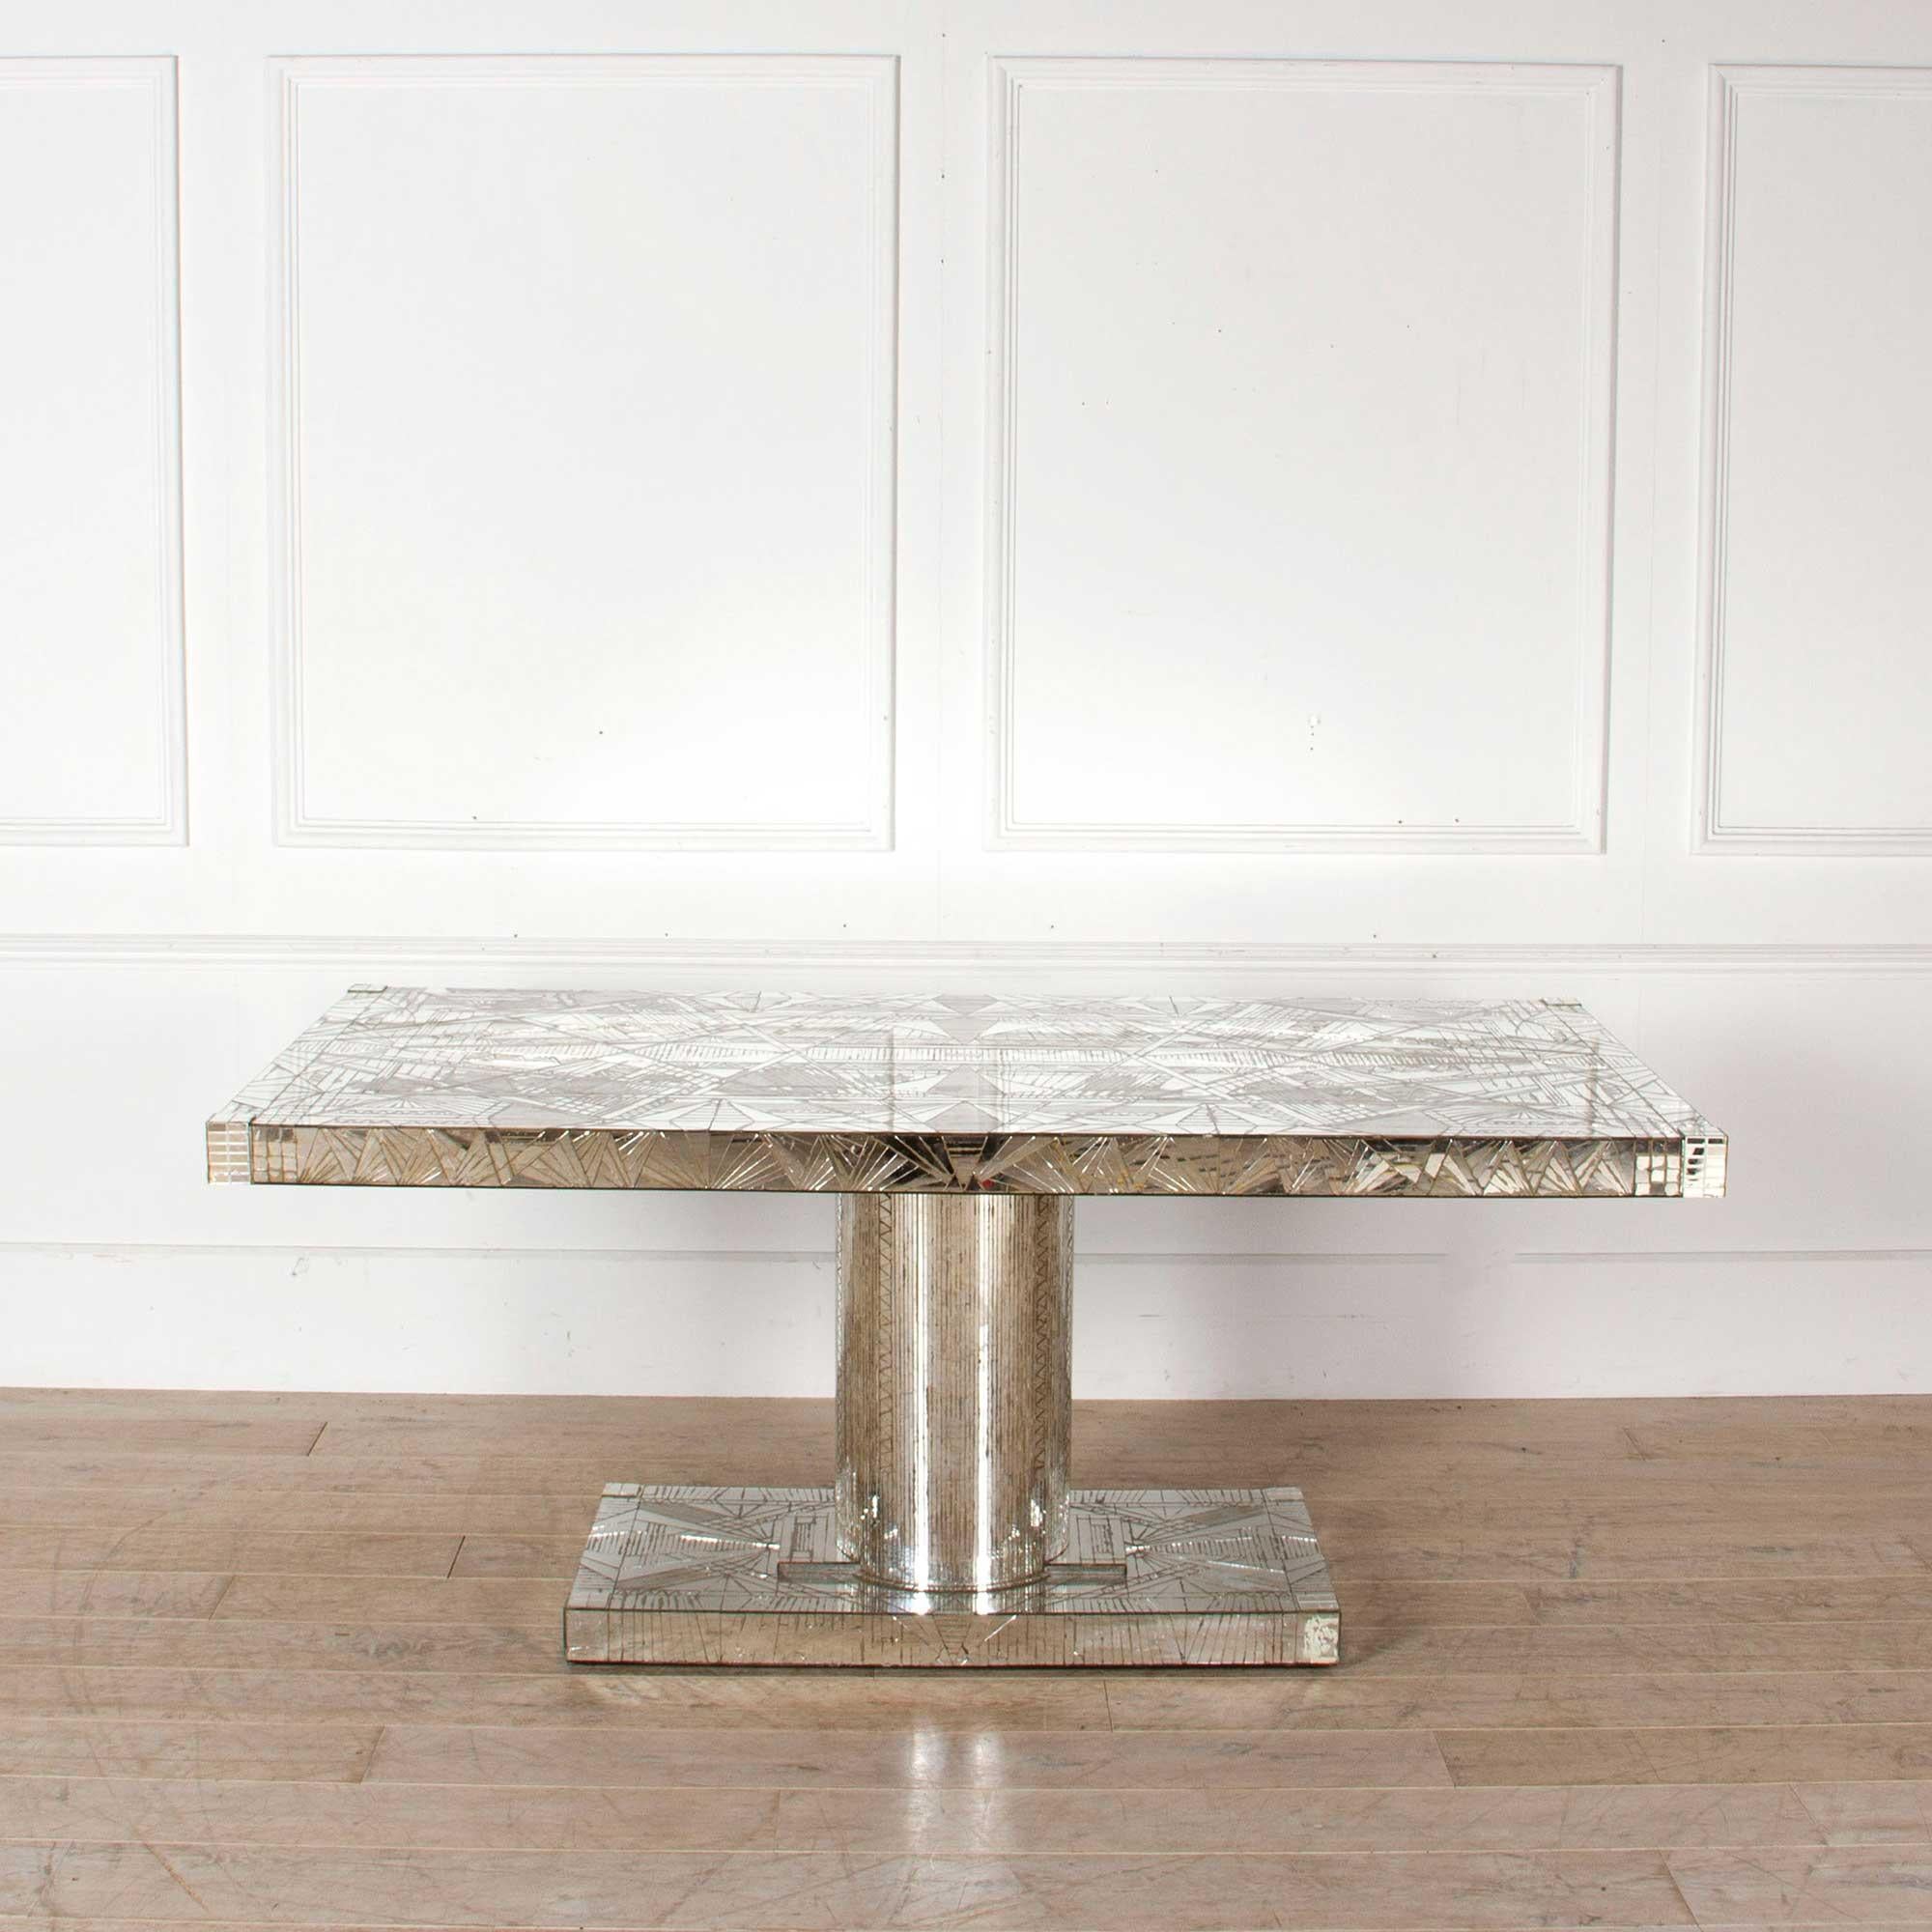 A rare 20th century French mosaic mirrored dining table designed by Daniel Clement.